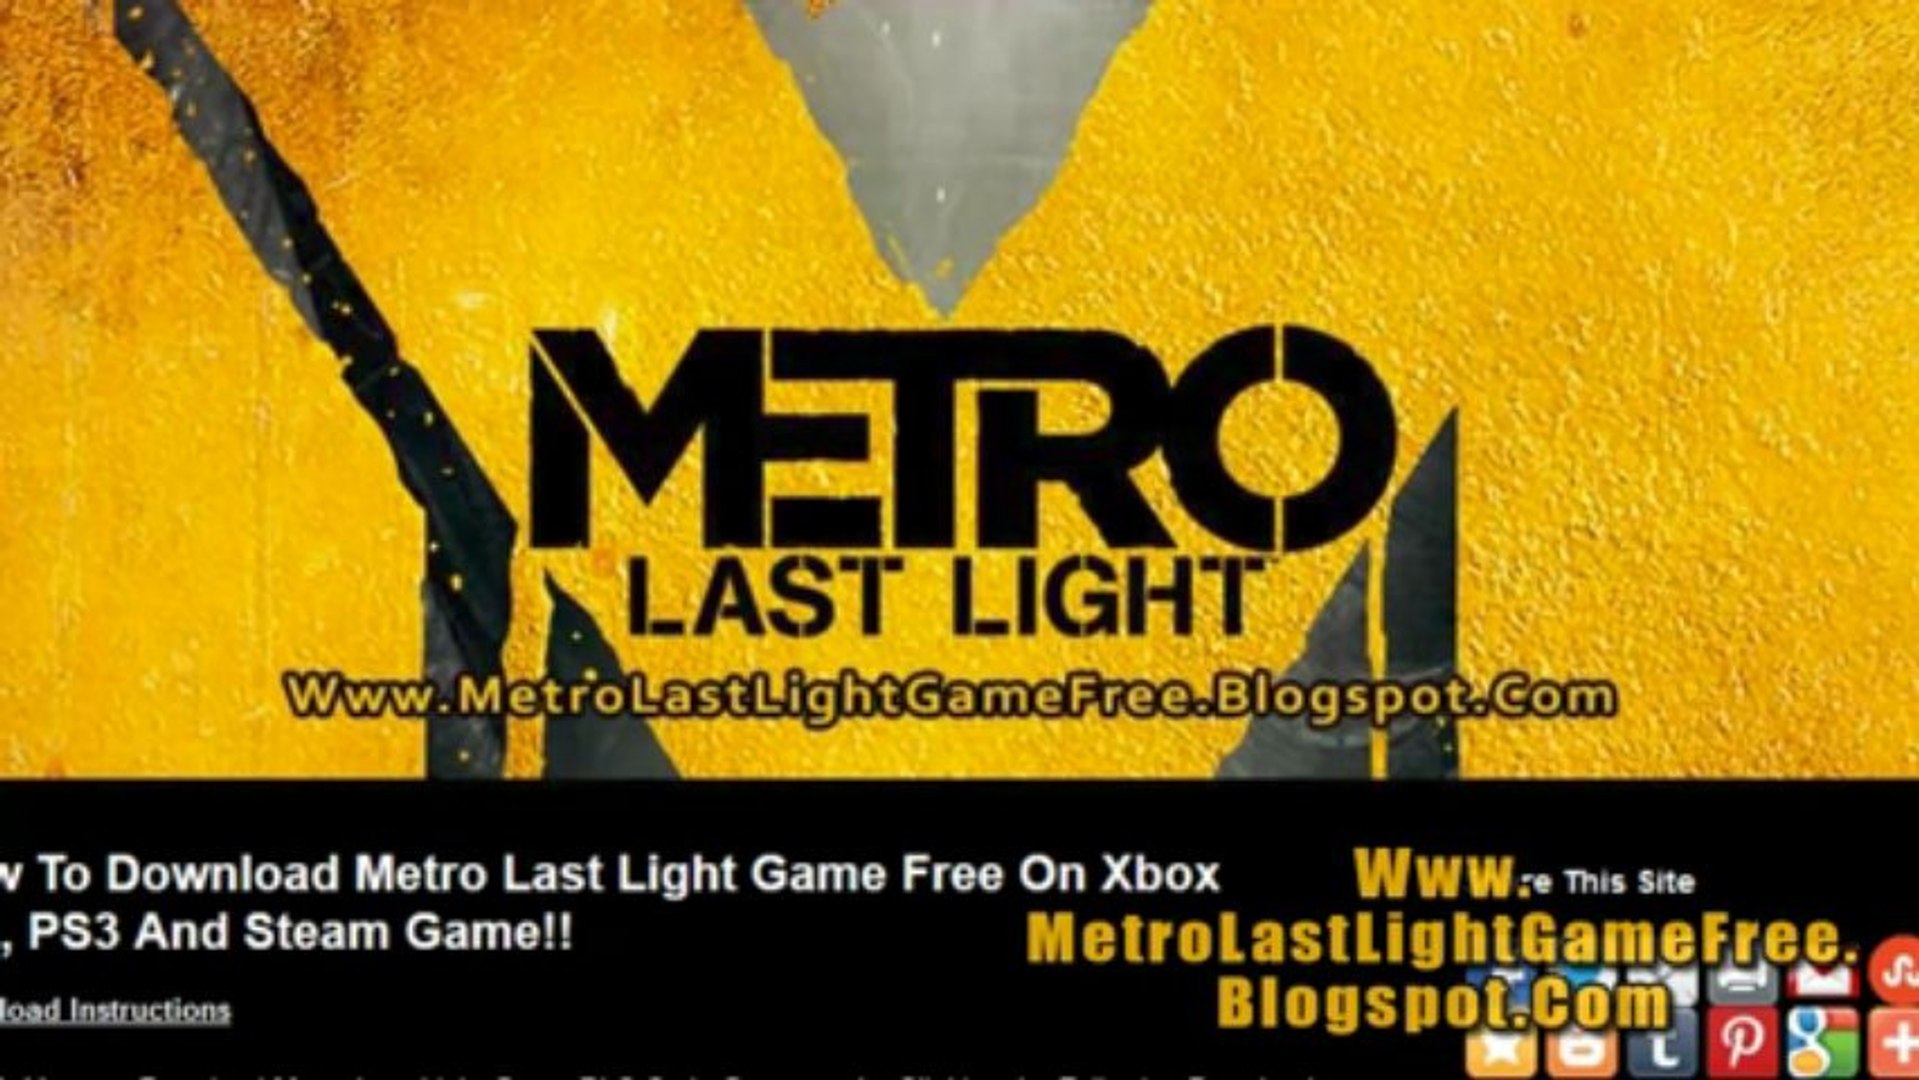 Download DLC Code Free For Metro Last Light Game - video Dailymotion